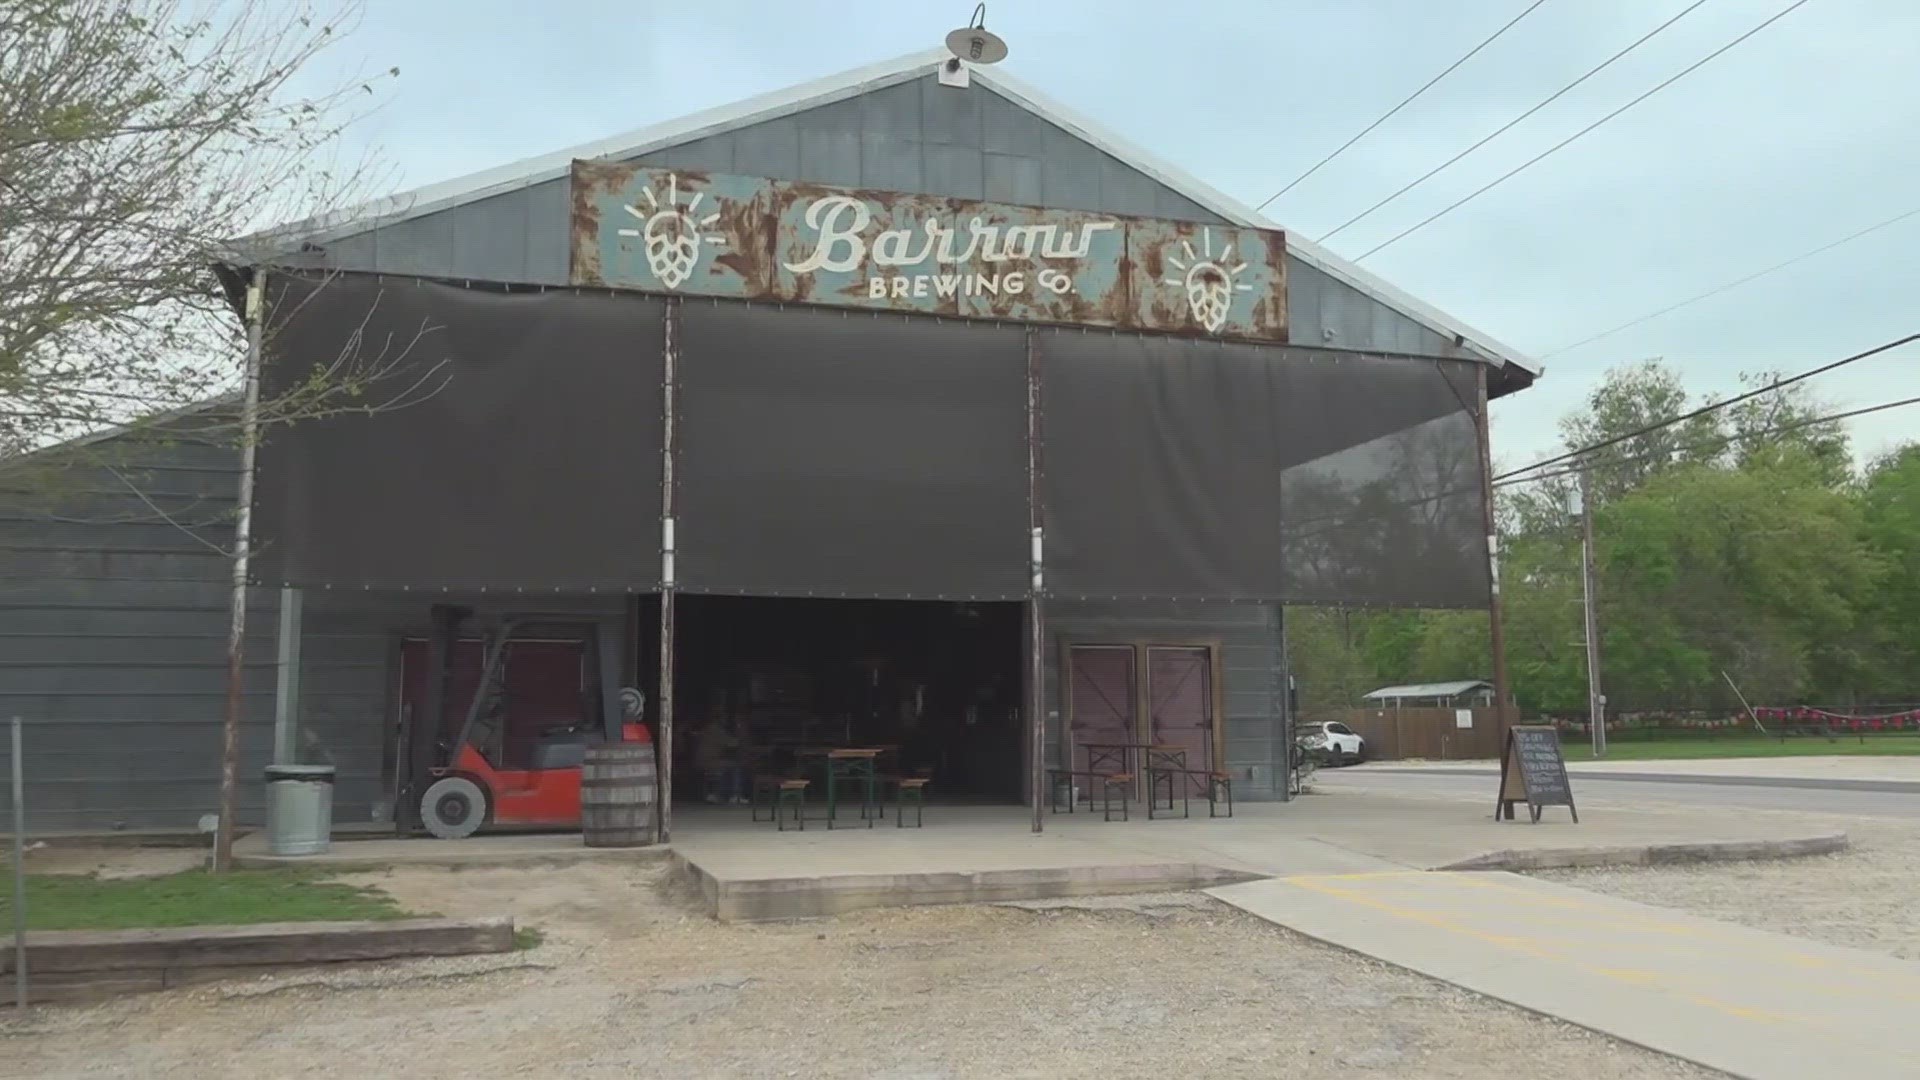 Businesses like Barrow Brewing Company are finalizing their plans to draw crowds in.